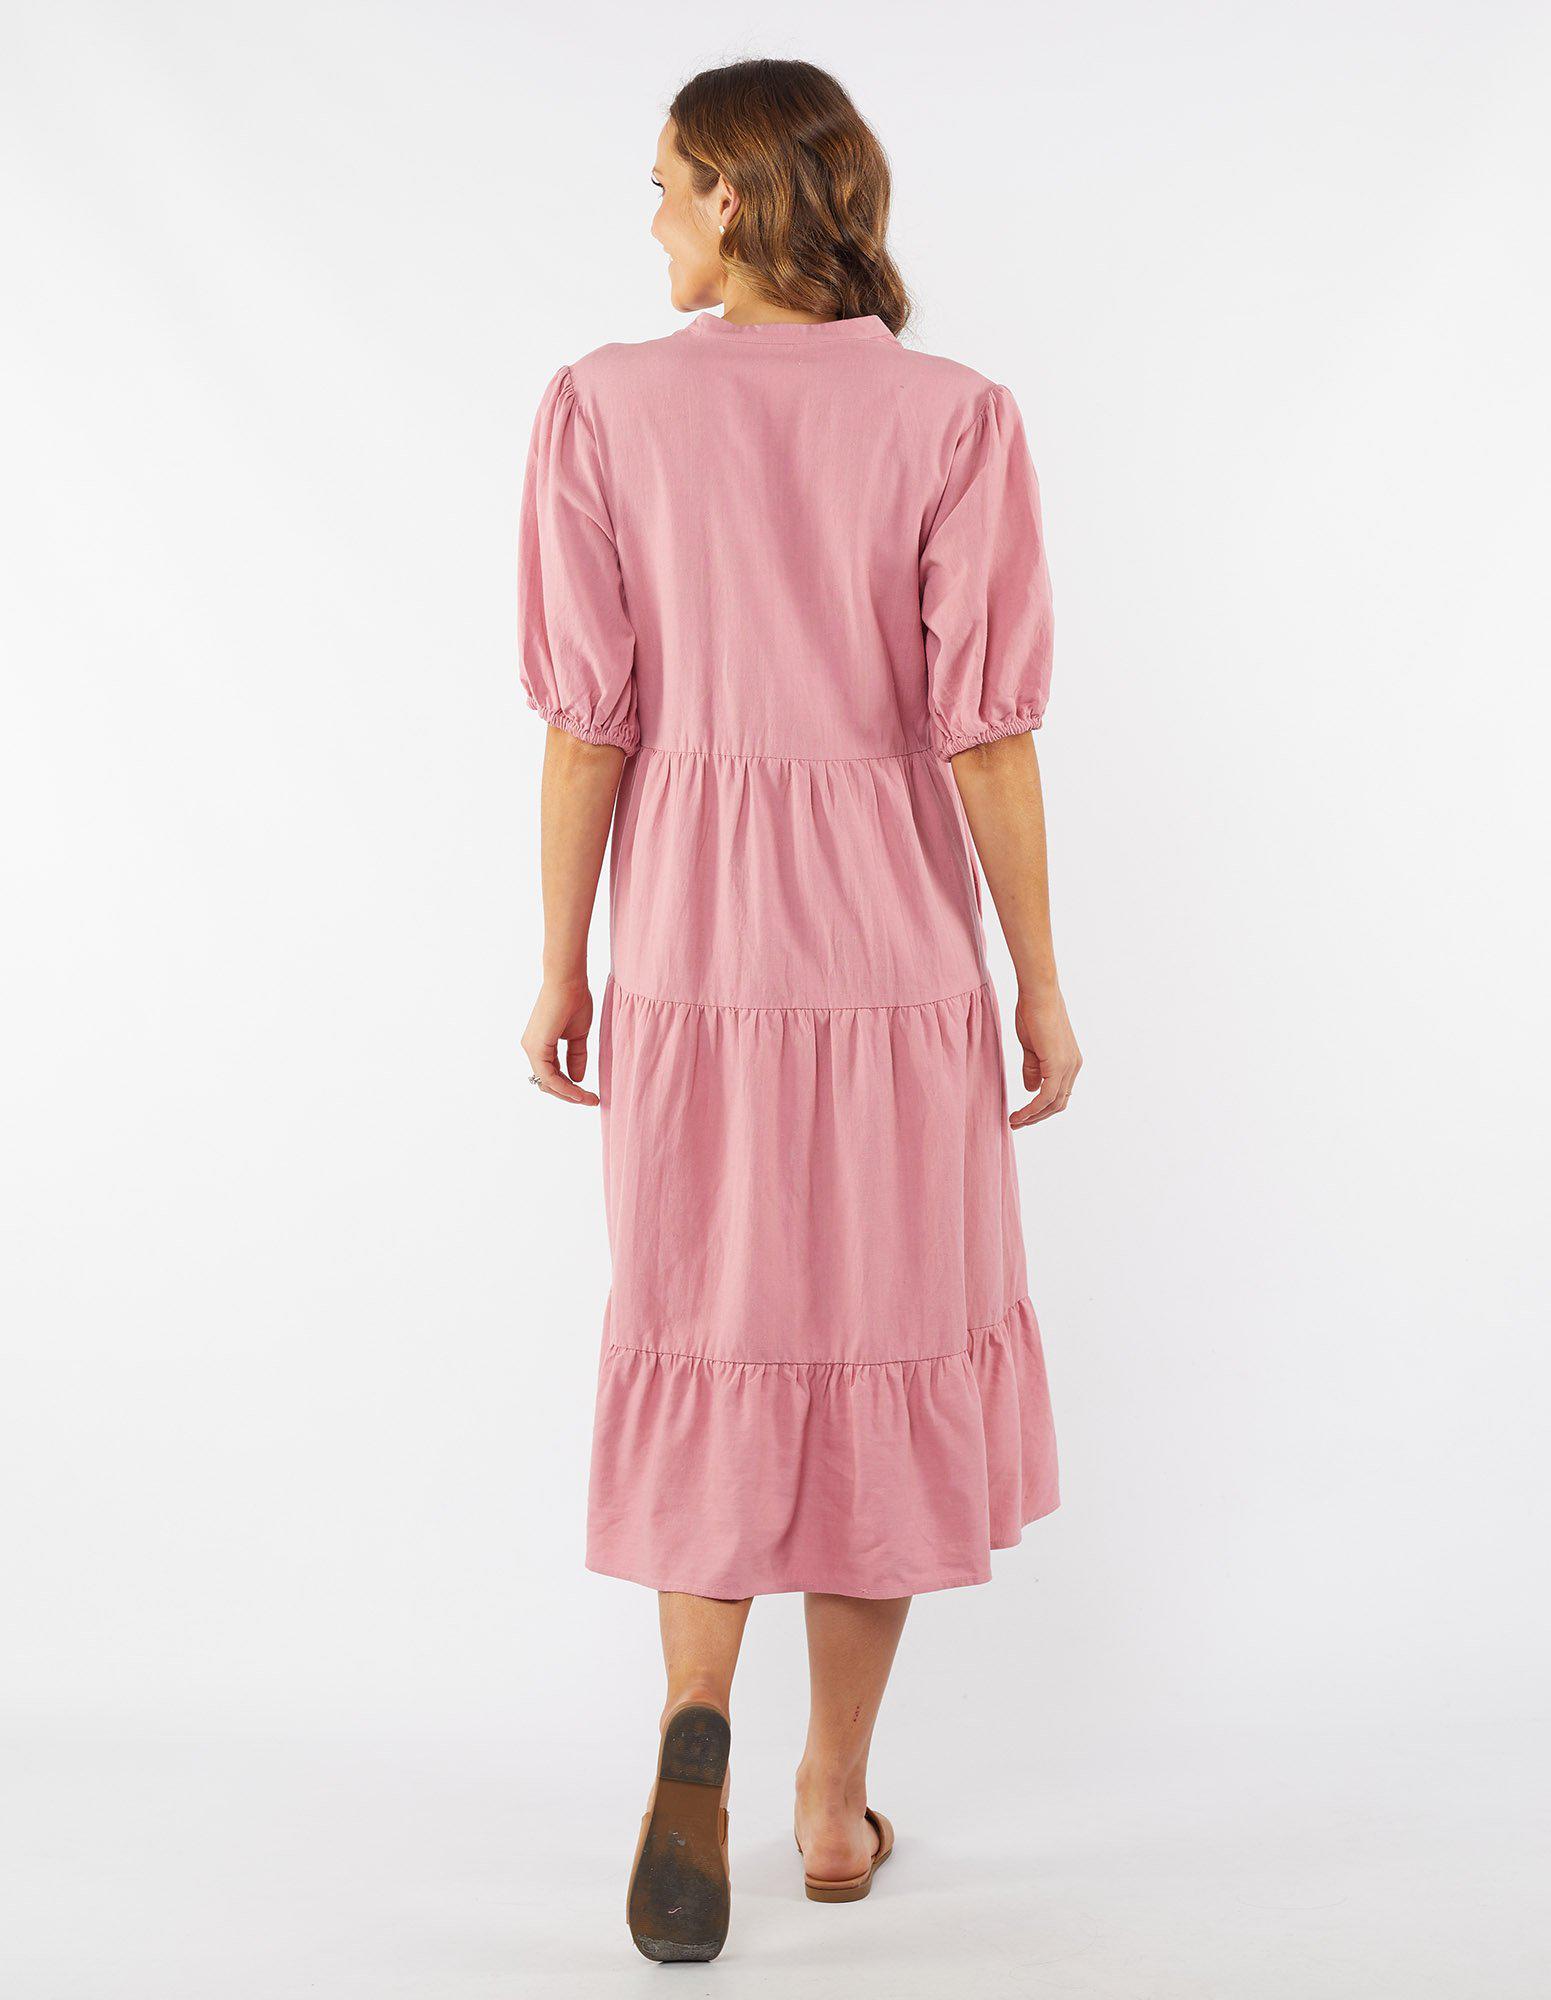 Constance Tiered Dress - Chateau Rose - Elm Lifestyle - FUDGE Gifts Home Lifestyle